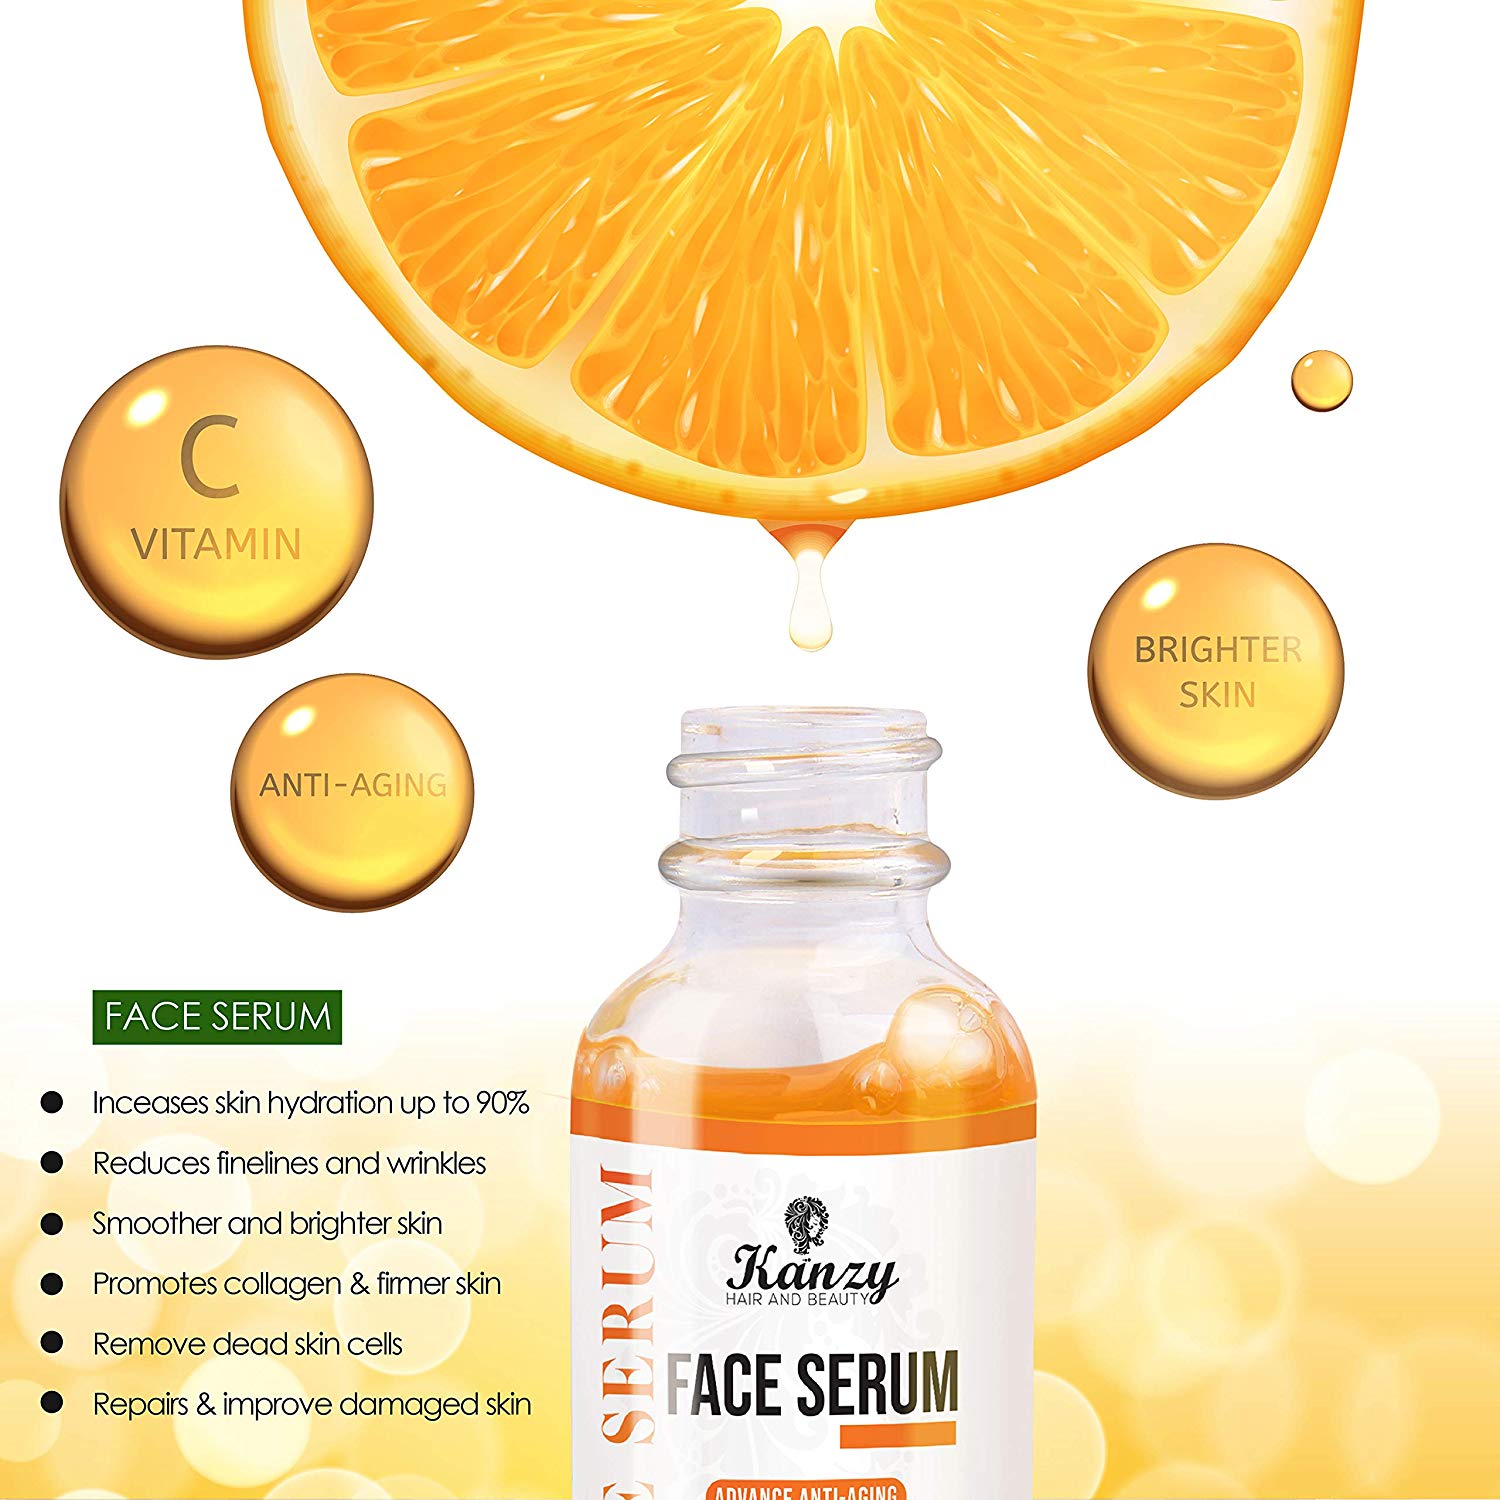 Pure Best Vitamin C Serum with 20% Hyaluronic Acid For Face | Skin